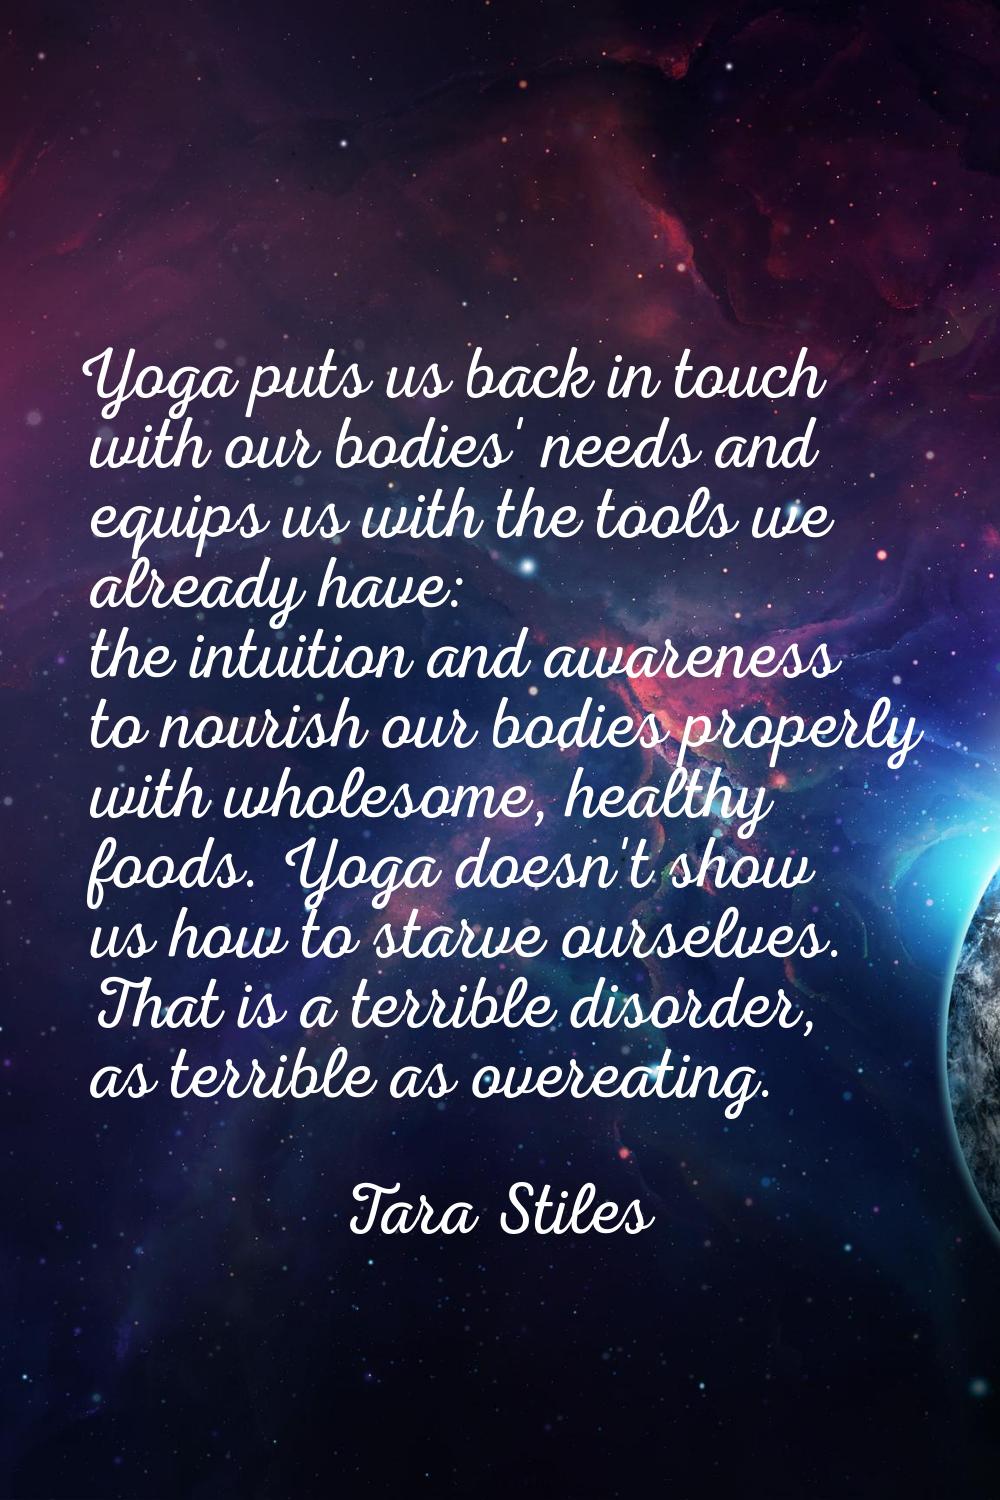 Yoga puts us back in touch with our bodies' needs and equips us with the tools we already have: the